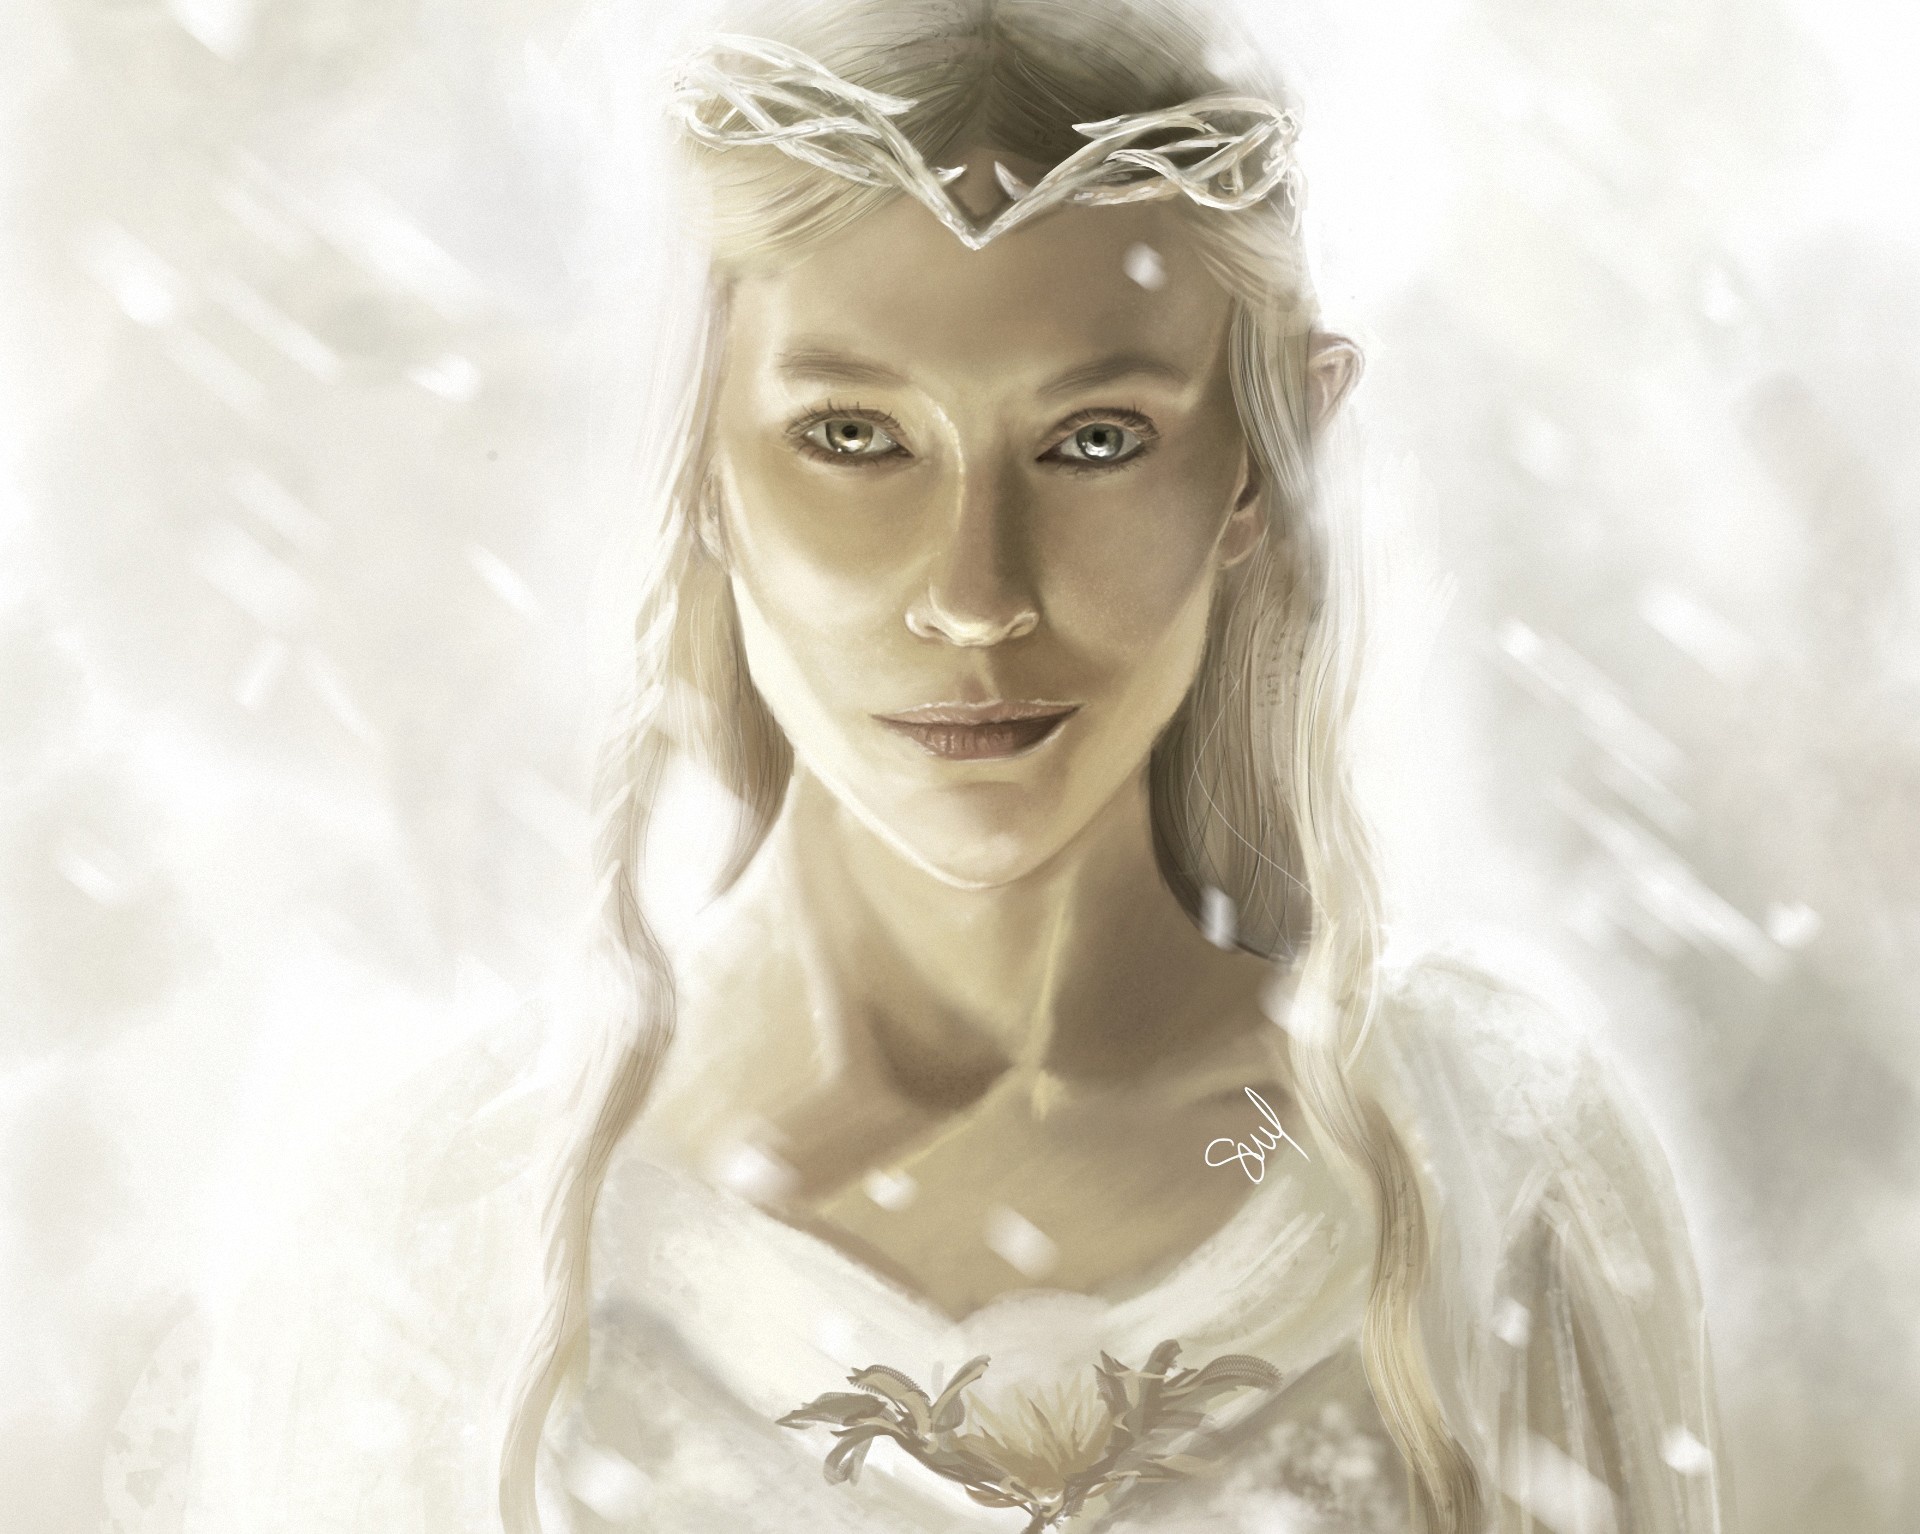 Fantasy Girl Galadriel The Lord Of The Rings Artwork Elven Frontal View 1920x1534